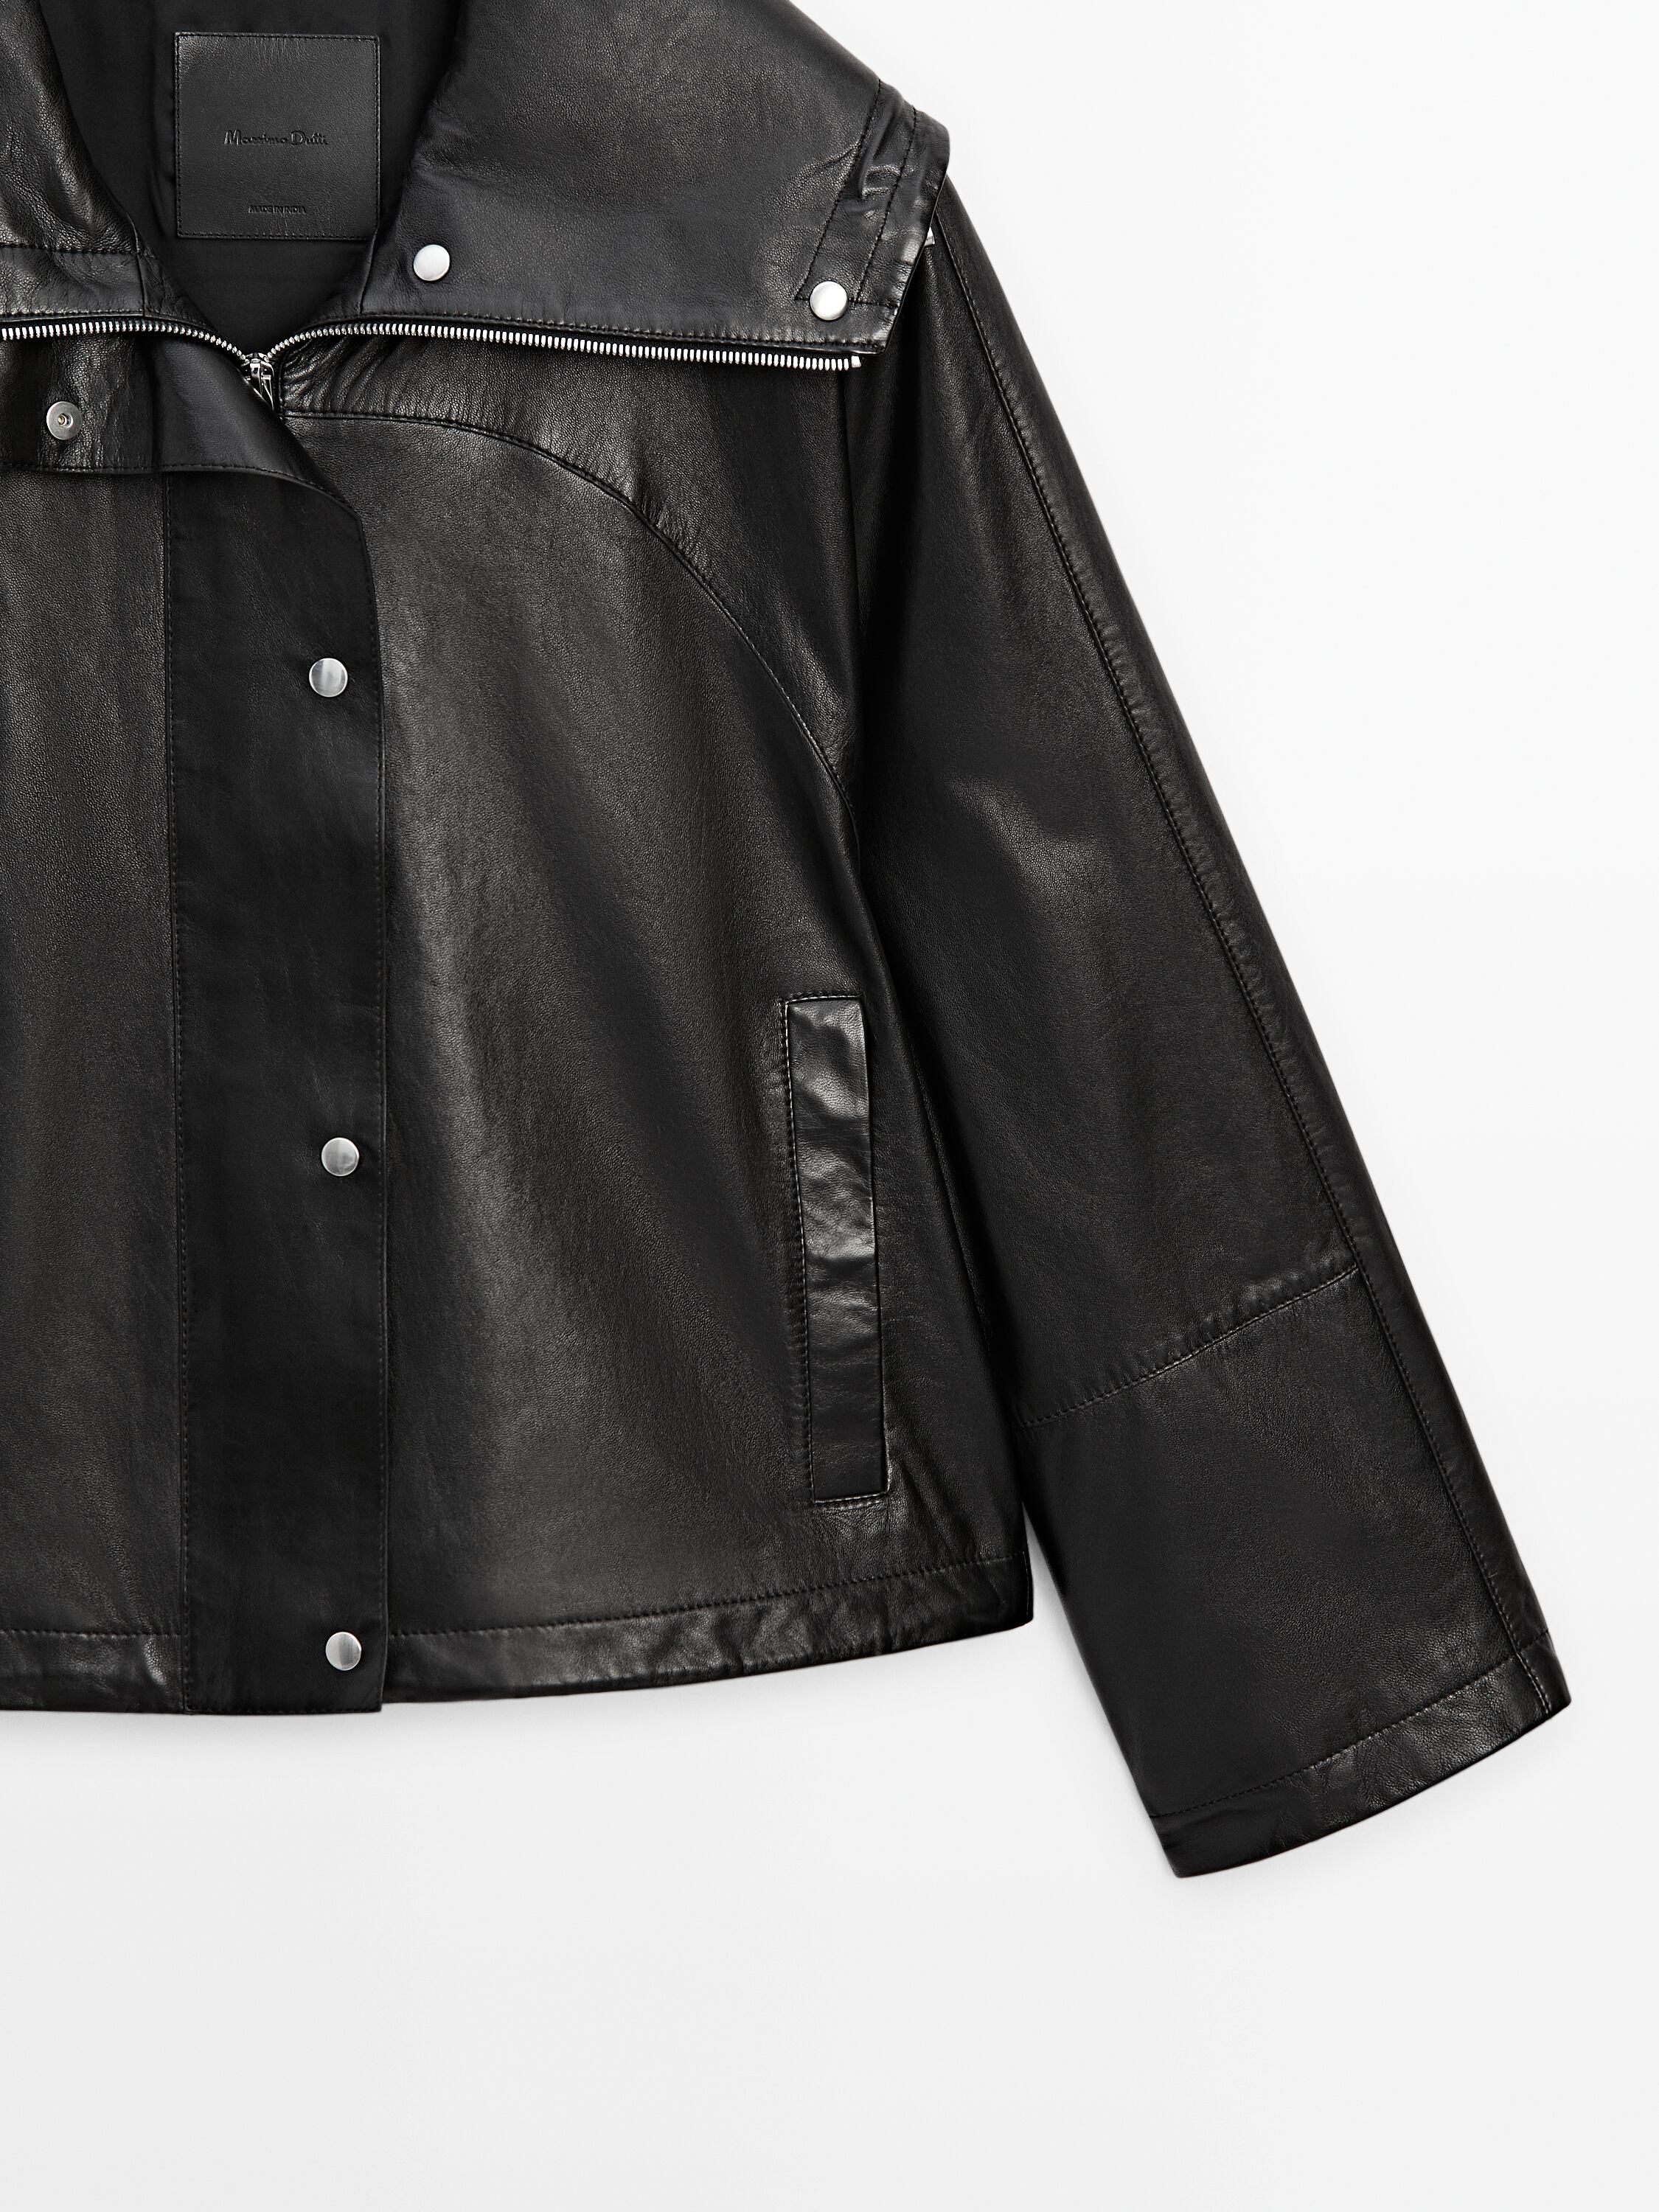 Nappa leather jacket with snap-buttons